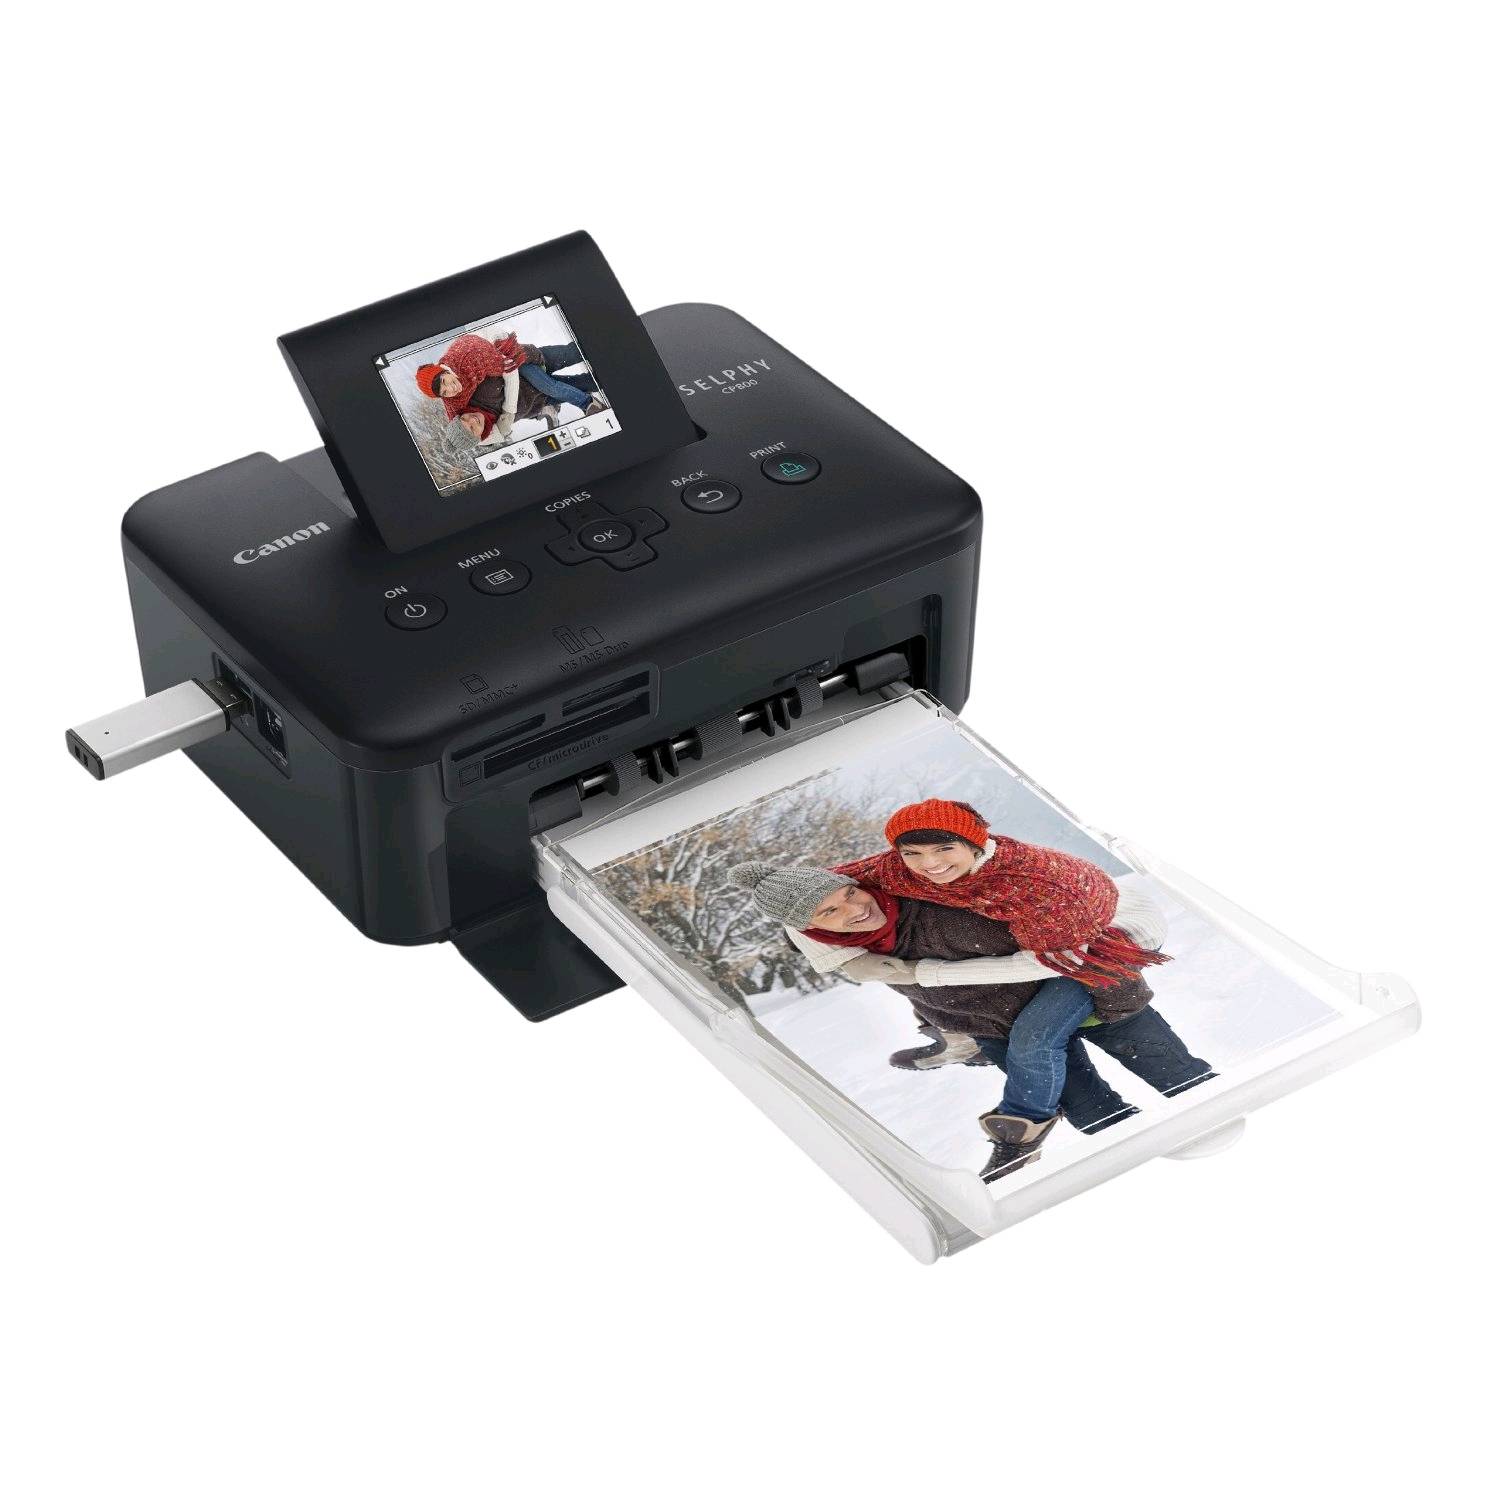 Instagramers Tests The New Canon Selphy Cp900 Compact Photo Printer 0362